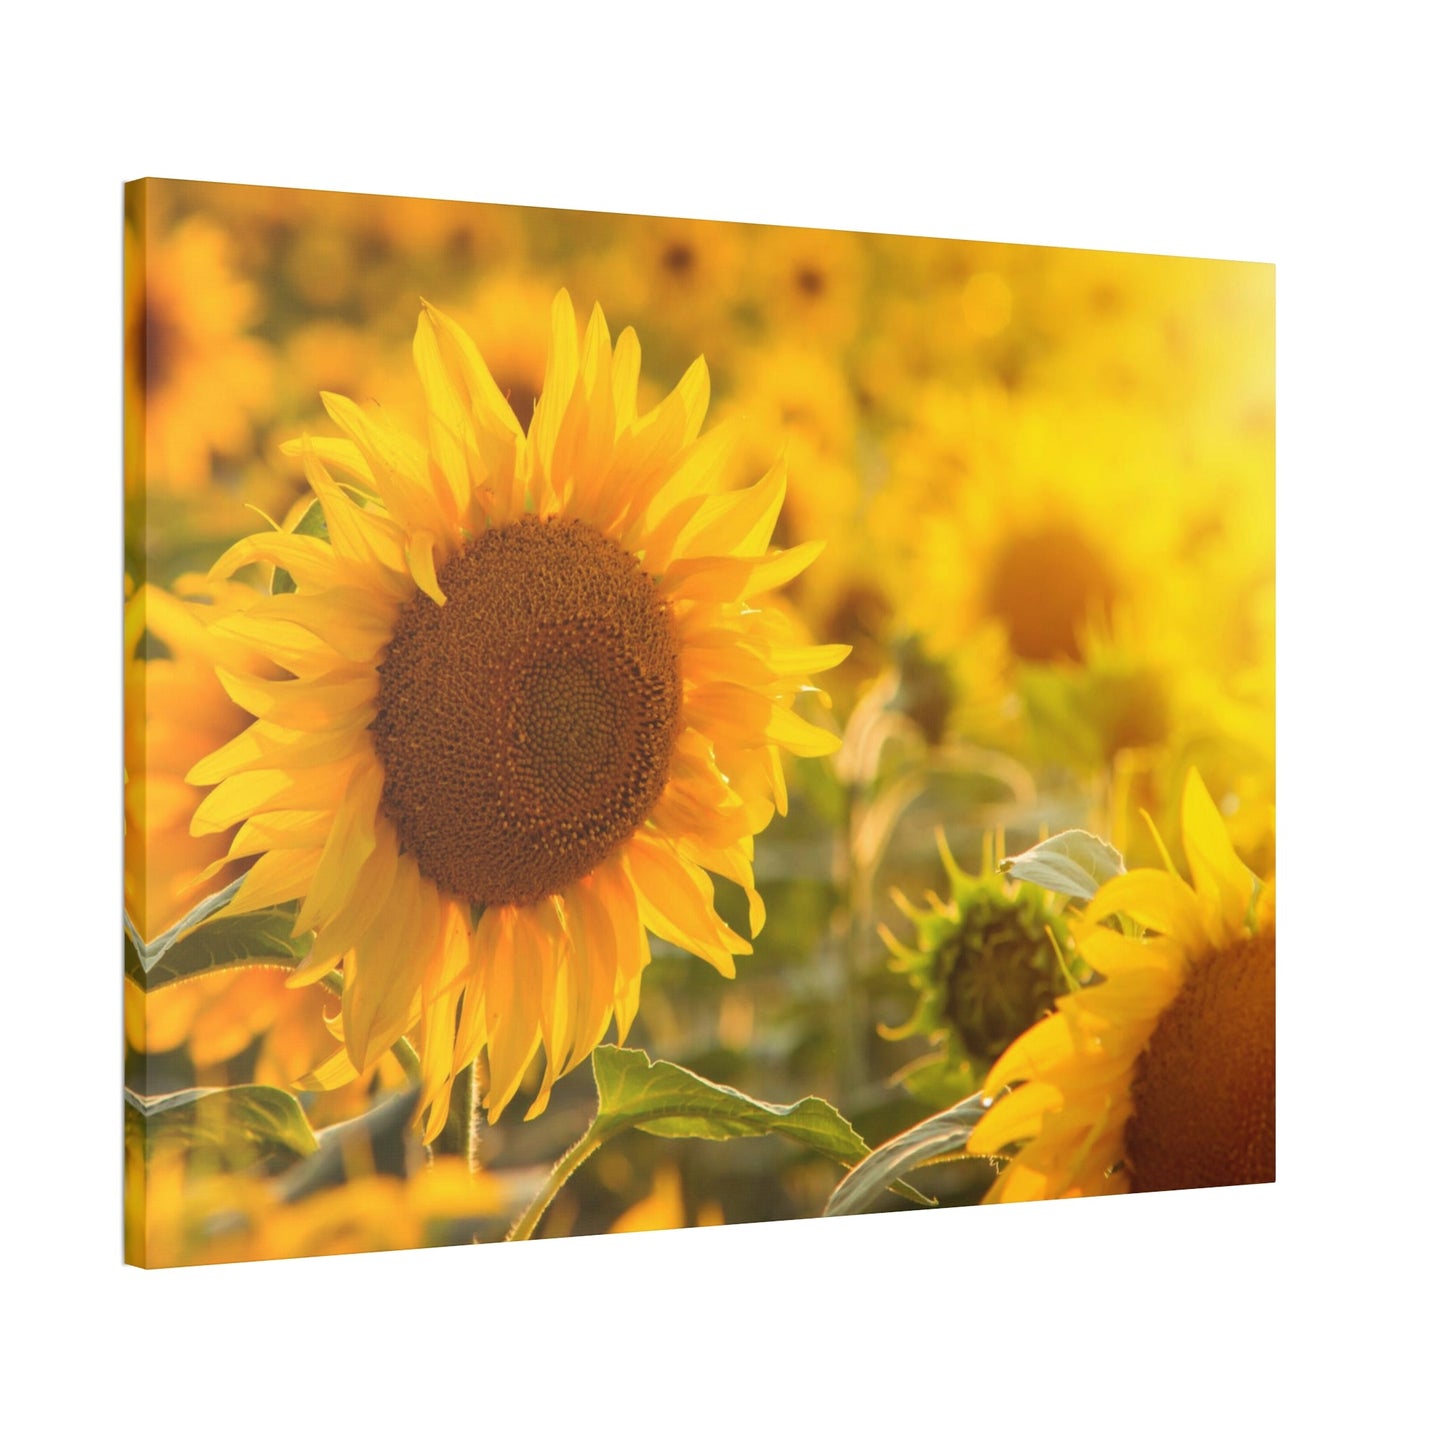 Golden Blooms: A Vibrant Ode to the Beauty of Sunflowers